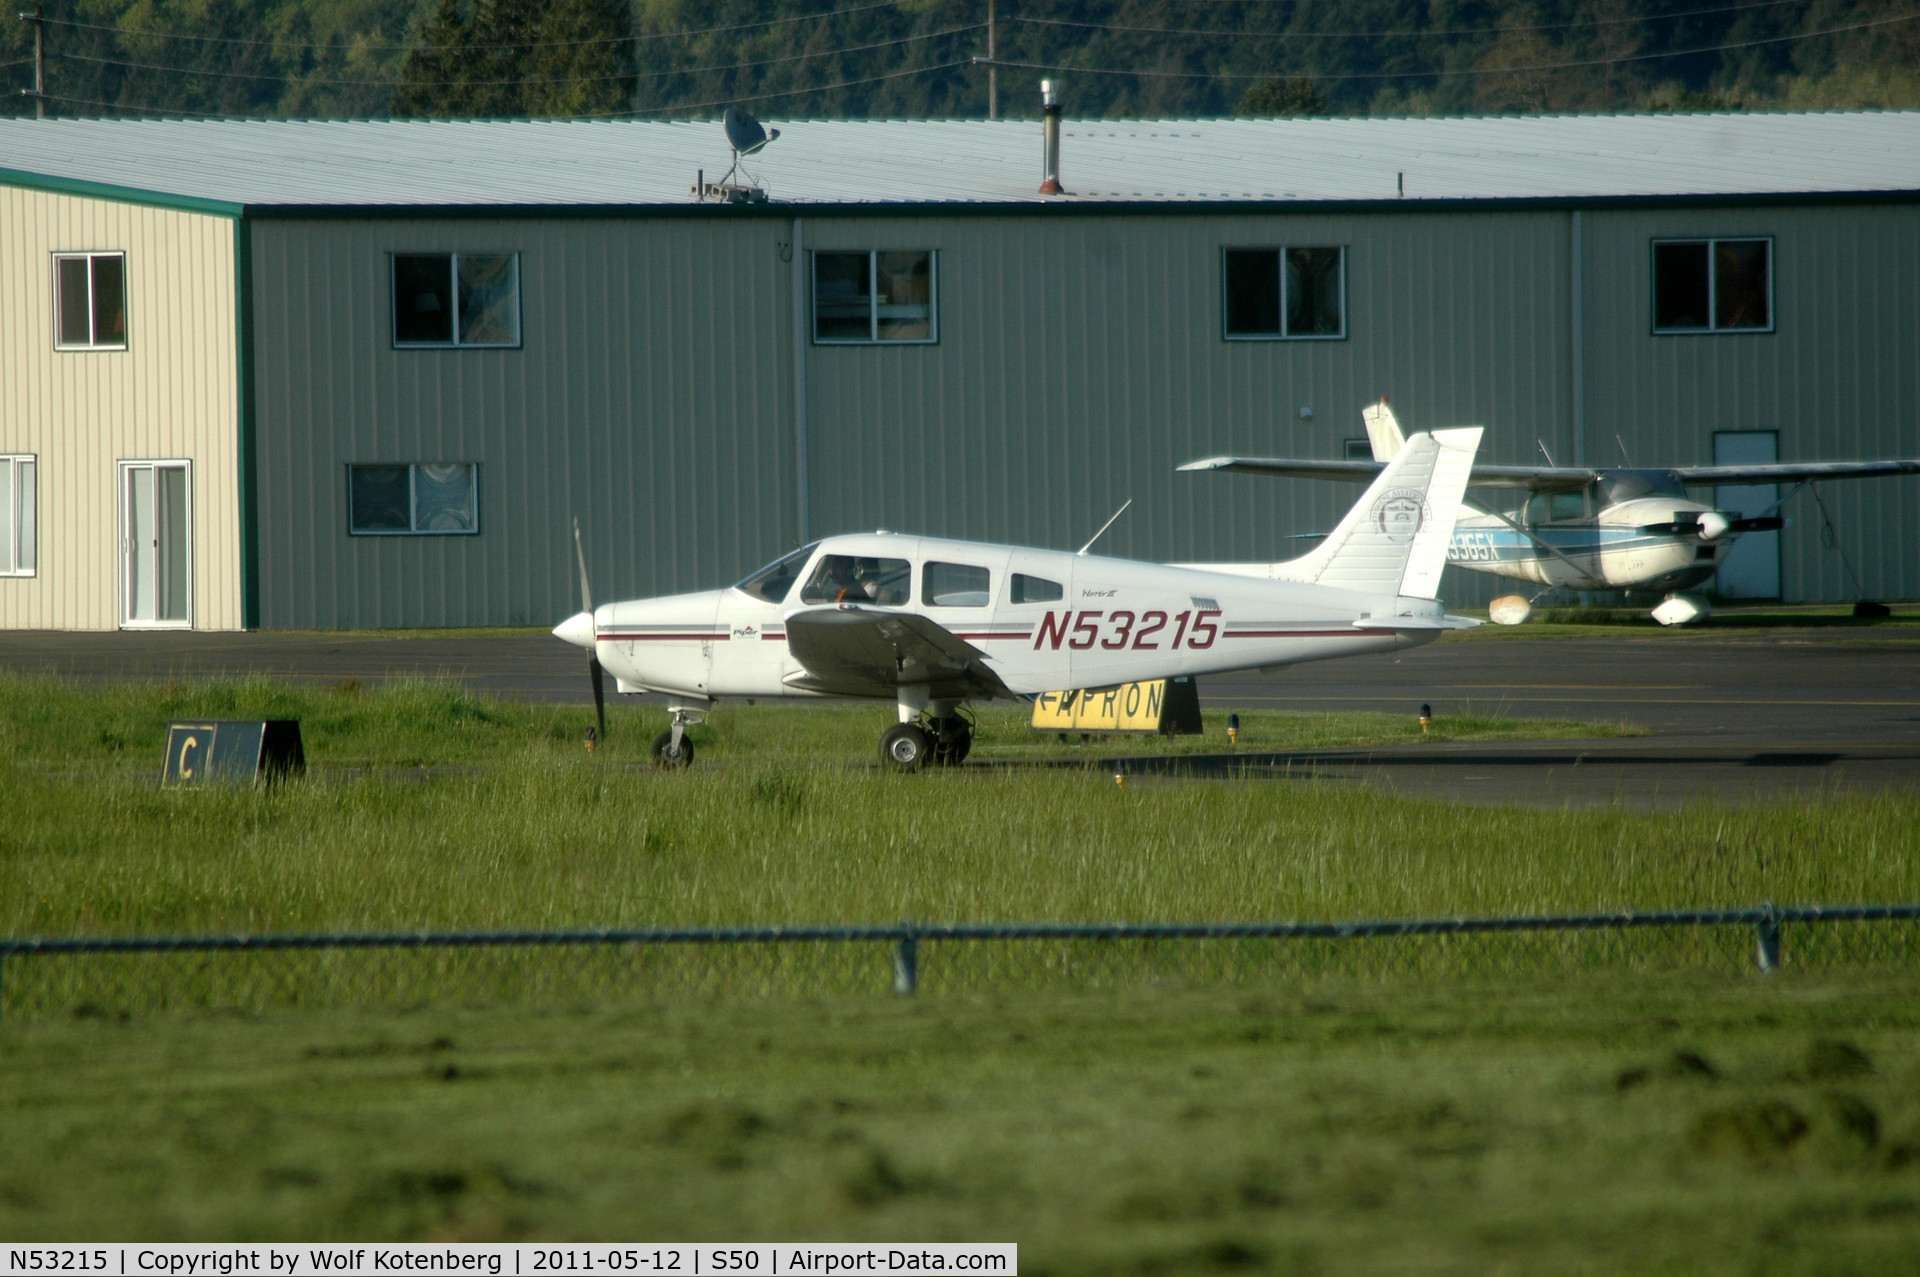 N53215, 2002 Piper PA-28-161 C/N 2842170, positioning for take off